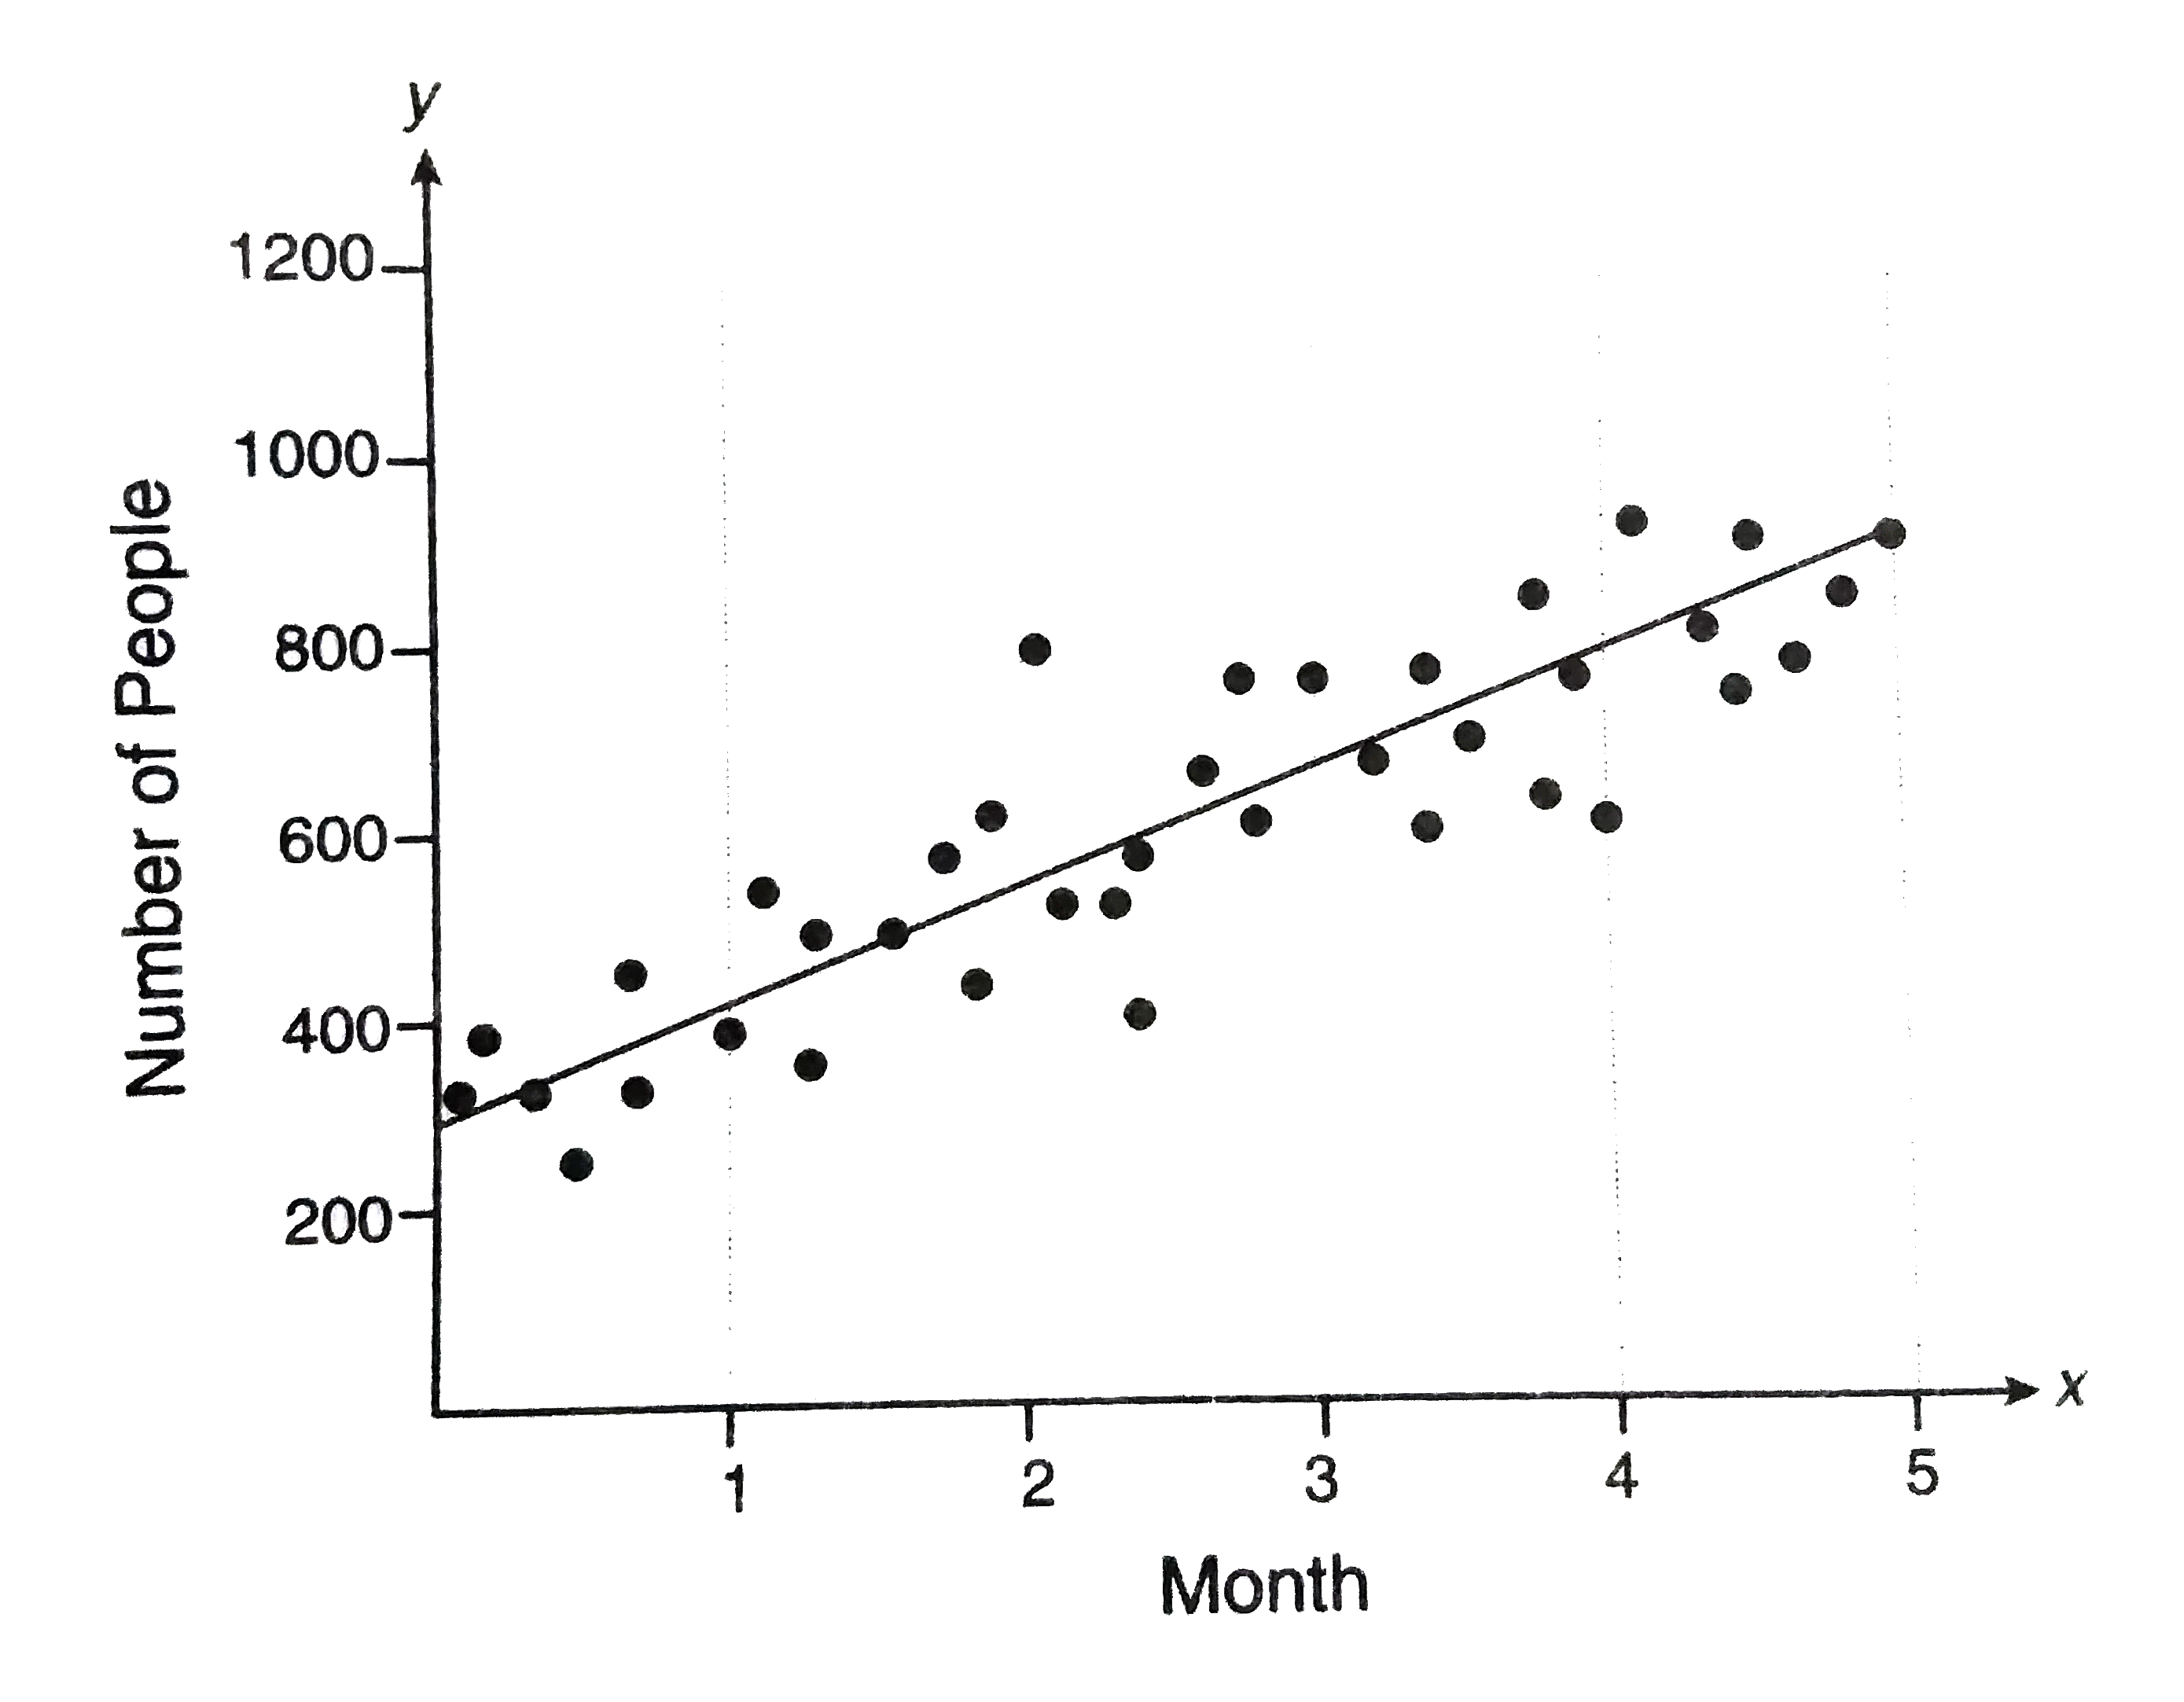 A new fitness class was started at several fitness clubs owned by the same company. The scatterplot shows the total number of people attending the class during the first five months in which the class was offered. The line of best fit is drawn.   Q. During the five-month period, the average increase in the number of people attending the class per month is closest to which of the following?